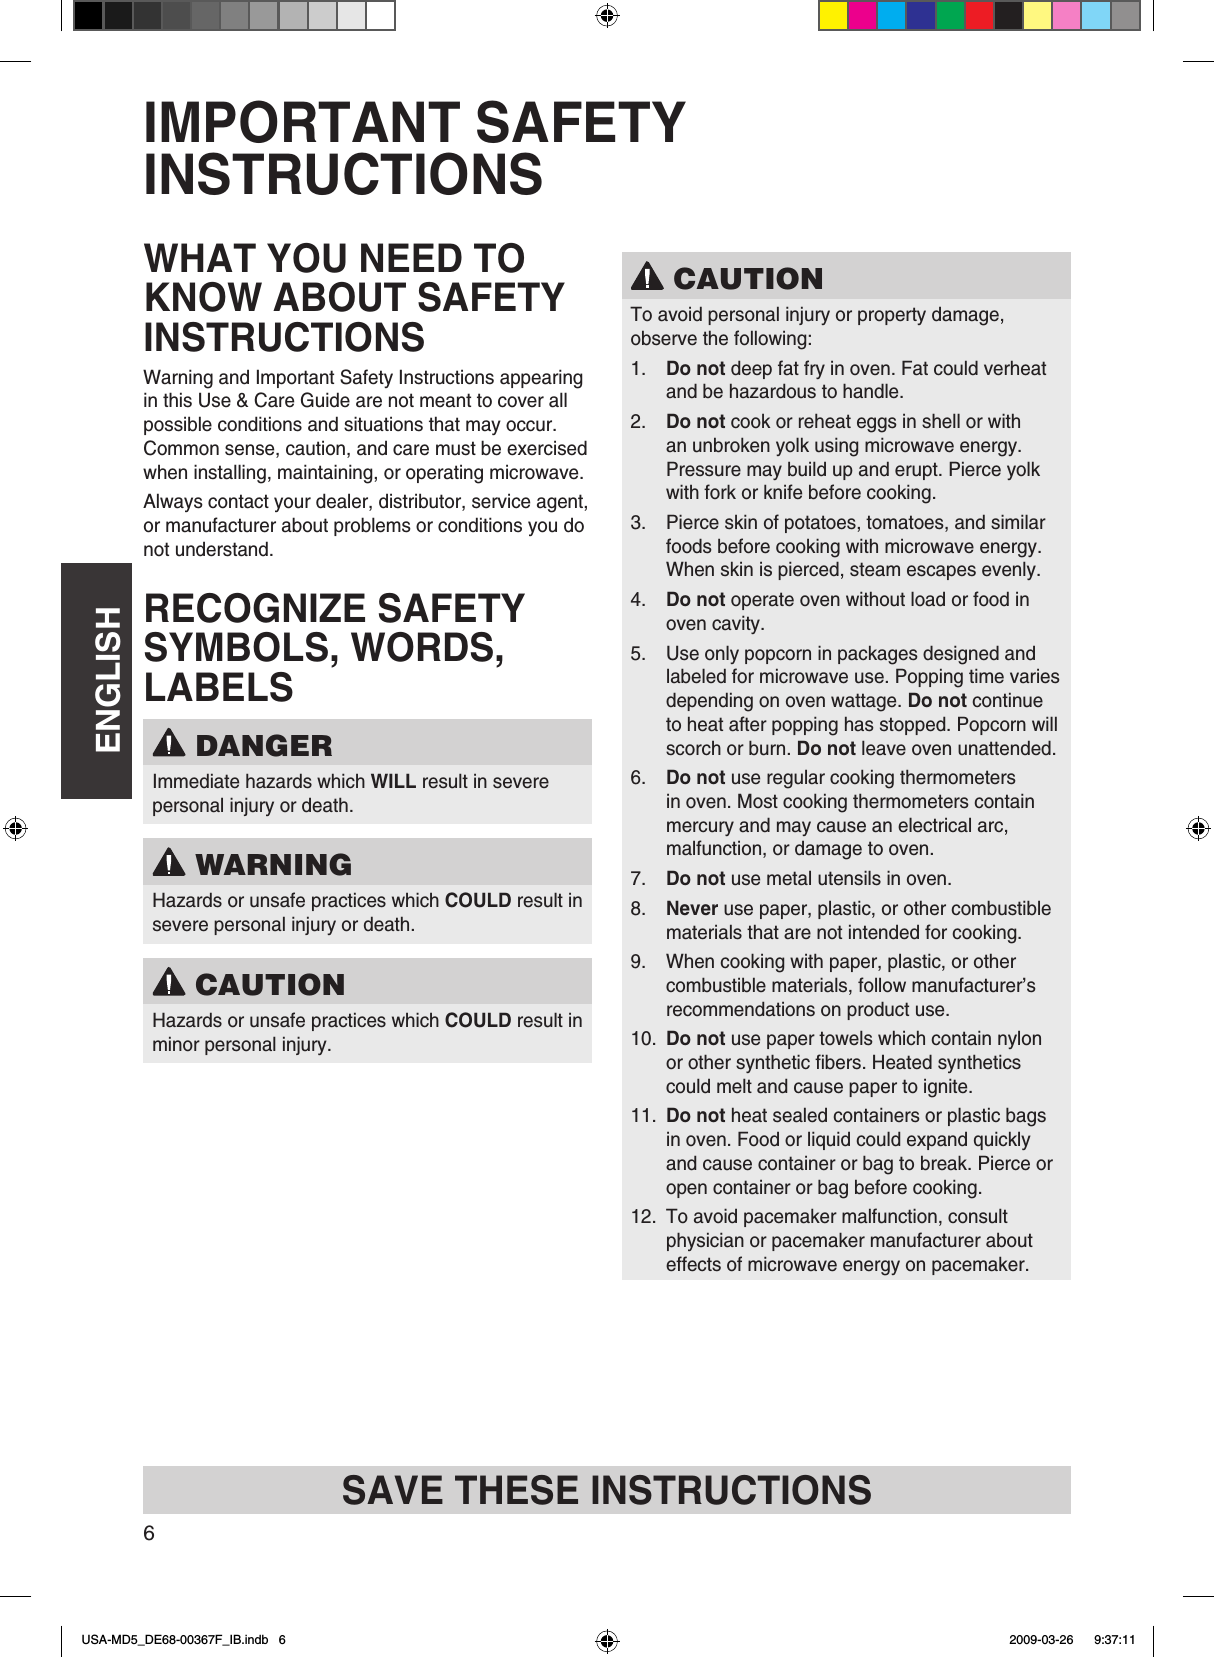 ENGLISH6IMPORTANT SAFETY INSTRUCTIONSWHAT YOU NEED TO KNOW ABOUT SAFETY INSTRUCTIONSWarning and Important Safety Instructions appearing in this Use &amp; Care Guide are not meant to cover all possible conditions and situations that may occur Common sense, caution, and care must be exercised when installing, maintaining, or operating microwaveAlways contact your dealer, distributor, service agent, or manufacturer about problems or conditions you do not understandRECOGNIZE SAFETY SYMBOLS, WORDS, LABELS DANGERImmediate hazards which WILL result in severe personal injury or death WARNINGHazards or unsafe practices which COULD result in severe personal injury or death CAUTIONHazards or unsafe practices which COULD result in minor personal injury CAUTIONTo avoid personal injury or property damage, observe the following:1  Do not deep fat fry in oven Fat could verheat and be hazardous to handle2  Do not cook or reheat eggs in shell or with an unbroken yolk using microwave energy Pressure may build up and erupt Pierce yolk with fork or knife before cooking3  Pierce skin of potatoes, tomatoes, and similar foods before cooking with microwave energy When skin is pierced, steam escapes evenly4  Do not operate oven without load or food in oven cavity5  Use only popcorn in packages designed and labeled for microwave use Popping time varies depending on oven wattage Do not continue to heat after popping has stopped Popcorn will scorch or burn Do not leave oven unattended6  Do not use regular cooking thermometers in oven Most cooking thermometers contain mercury and may cause an electrical arc, malfunction, or damage to oven7  Do not use metal utensils in oven8  Never use paper, plastic, or other combustible materials that are not intended for cooking9  When cooking with paper, plastic, or other combustible materials, follow manufacturer’s recommendations on product use10  Do not use paper towels which contain nylon or other synthetic bers Heated synthetics could melt and cause paper to ignite11  Do not heat sealed containers or plastic bags in oven Food or liquid could expand quickly and cause container or bag to break Pierce or open container or bag before cooking12  To avoid pacemaker malfunction, consult physician or pacemaker manufacturer about effects of microwave energy on pacemakerSAVE THESE INSTRUCTIONSUSA-MD5_DE68-00367F_IB.indb   6 2009-03-26    9:37:11